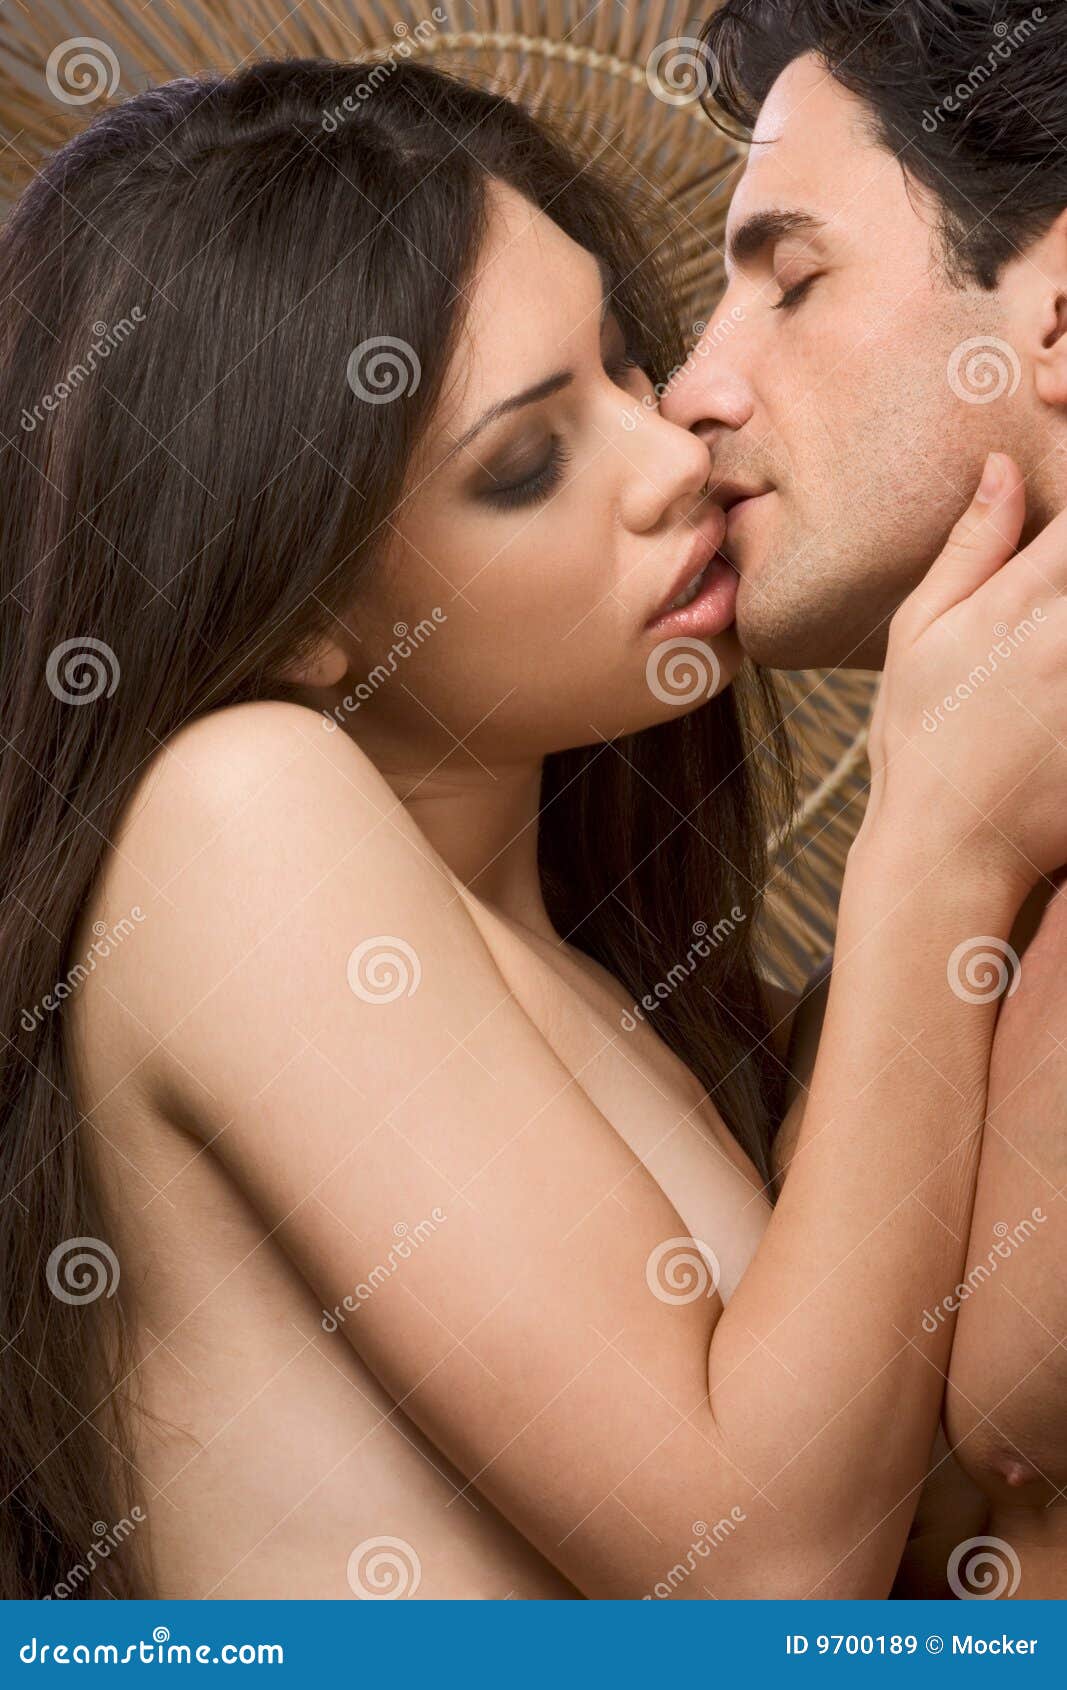 Kissing images naked